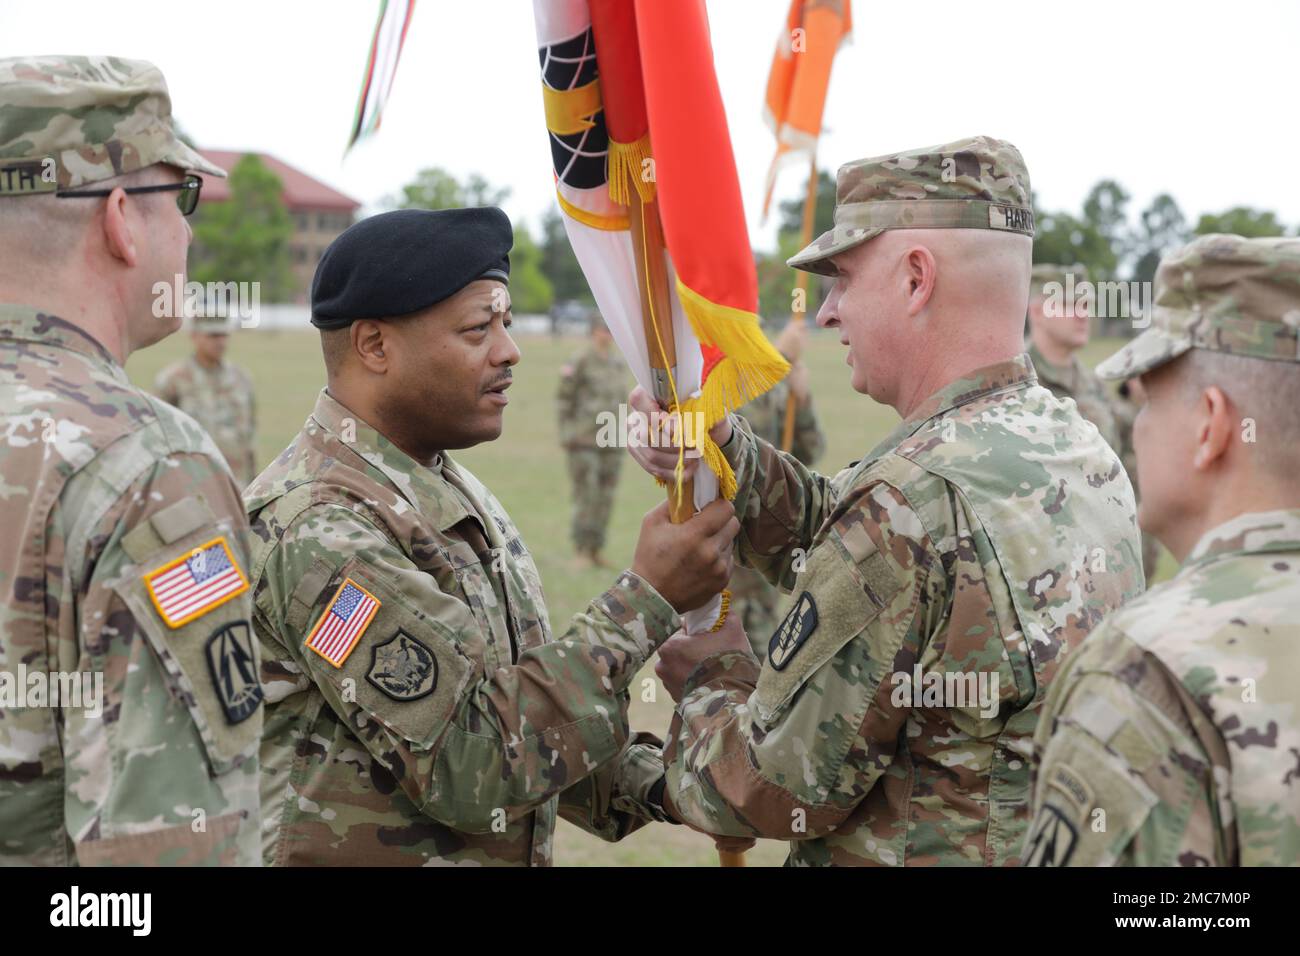 U.S. Army Command Sgt. Major Sheldon Gray(left), of the 359th Theater Tactical Signal Brigade(359th TTSB), hands off the 359th TTSB guidon to Col. Travis A. Hartman during the Change of Command Ceremony at Barton Field on Fort Gordon in Augusta, Ga on June 26, 2022. Col. Travis A. Hartman relinquished command of the 359th TTSB to Col. Tracy G. Monteith, ceremony was presided over by Major. Gen. John H. Phillips,  commanding general, 335th Signal Command Theater. Stock Photo